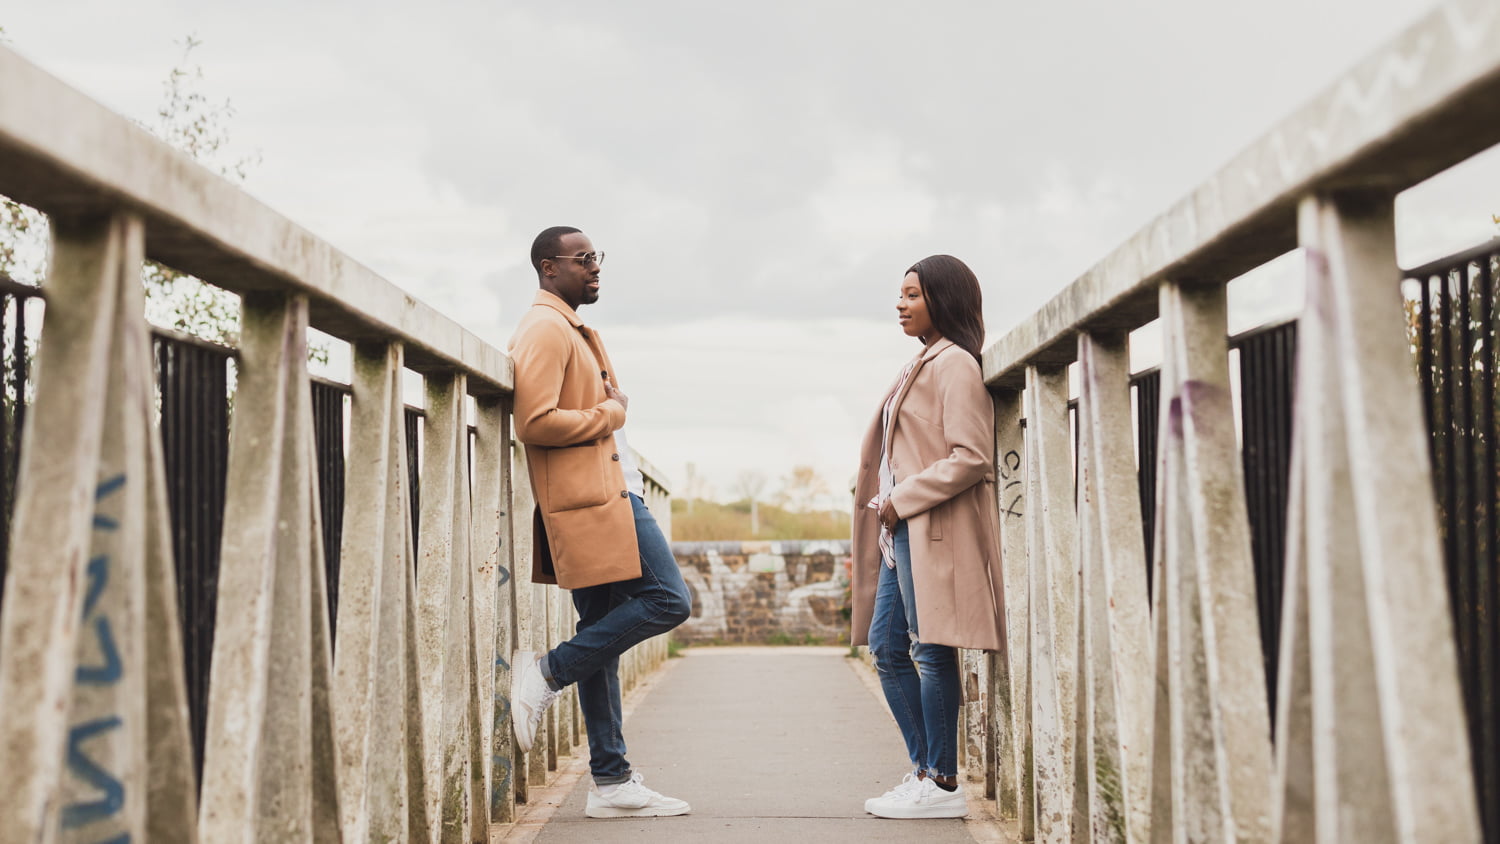 Engagement photo shoot in Walthamstow, London